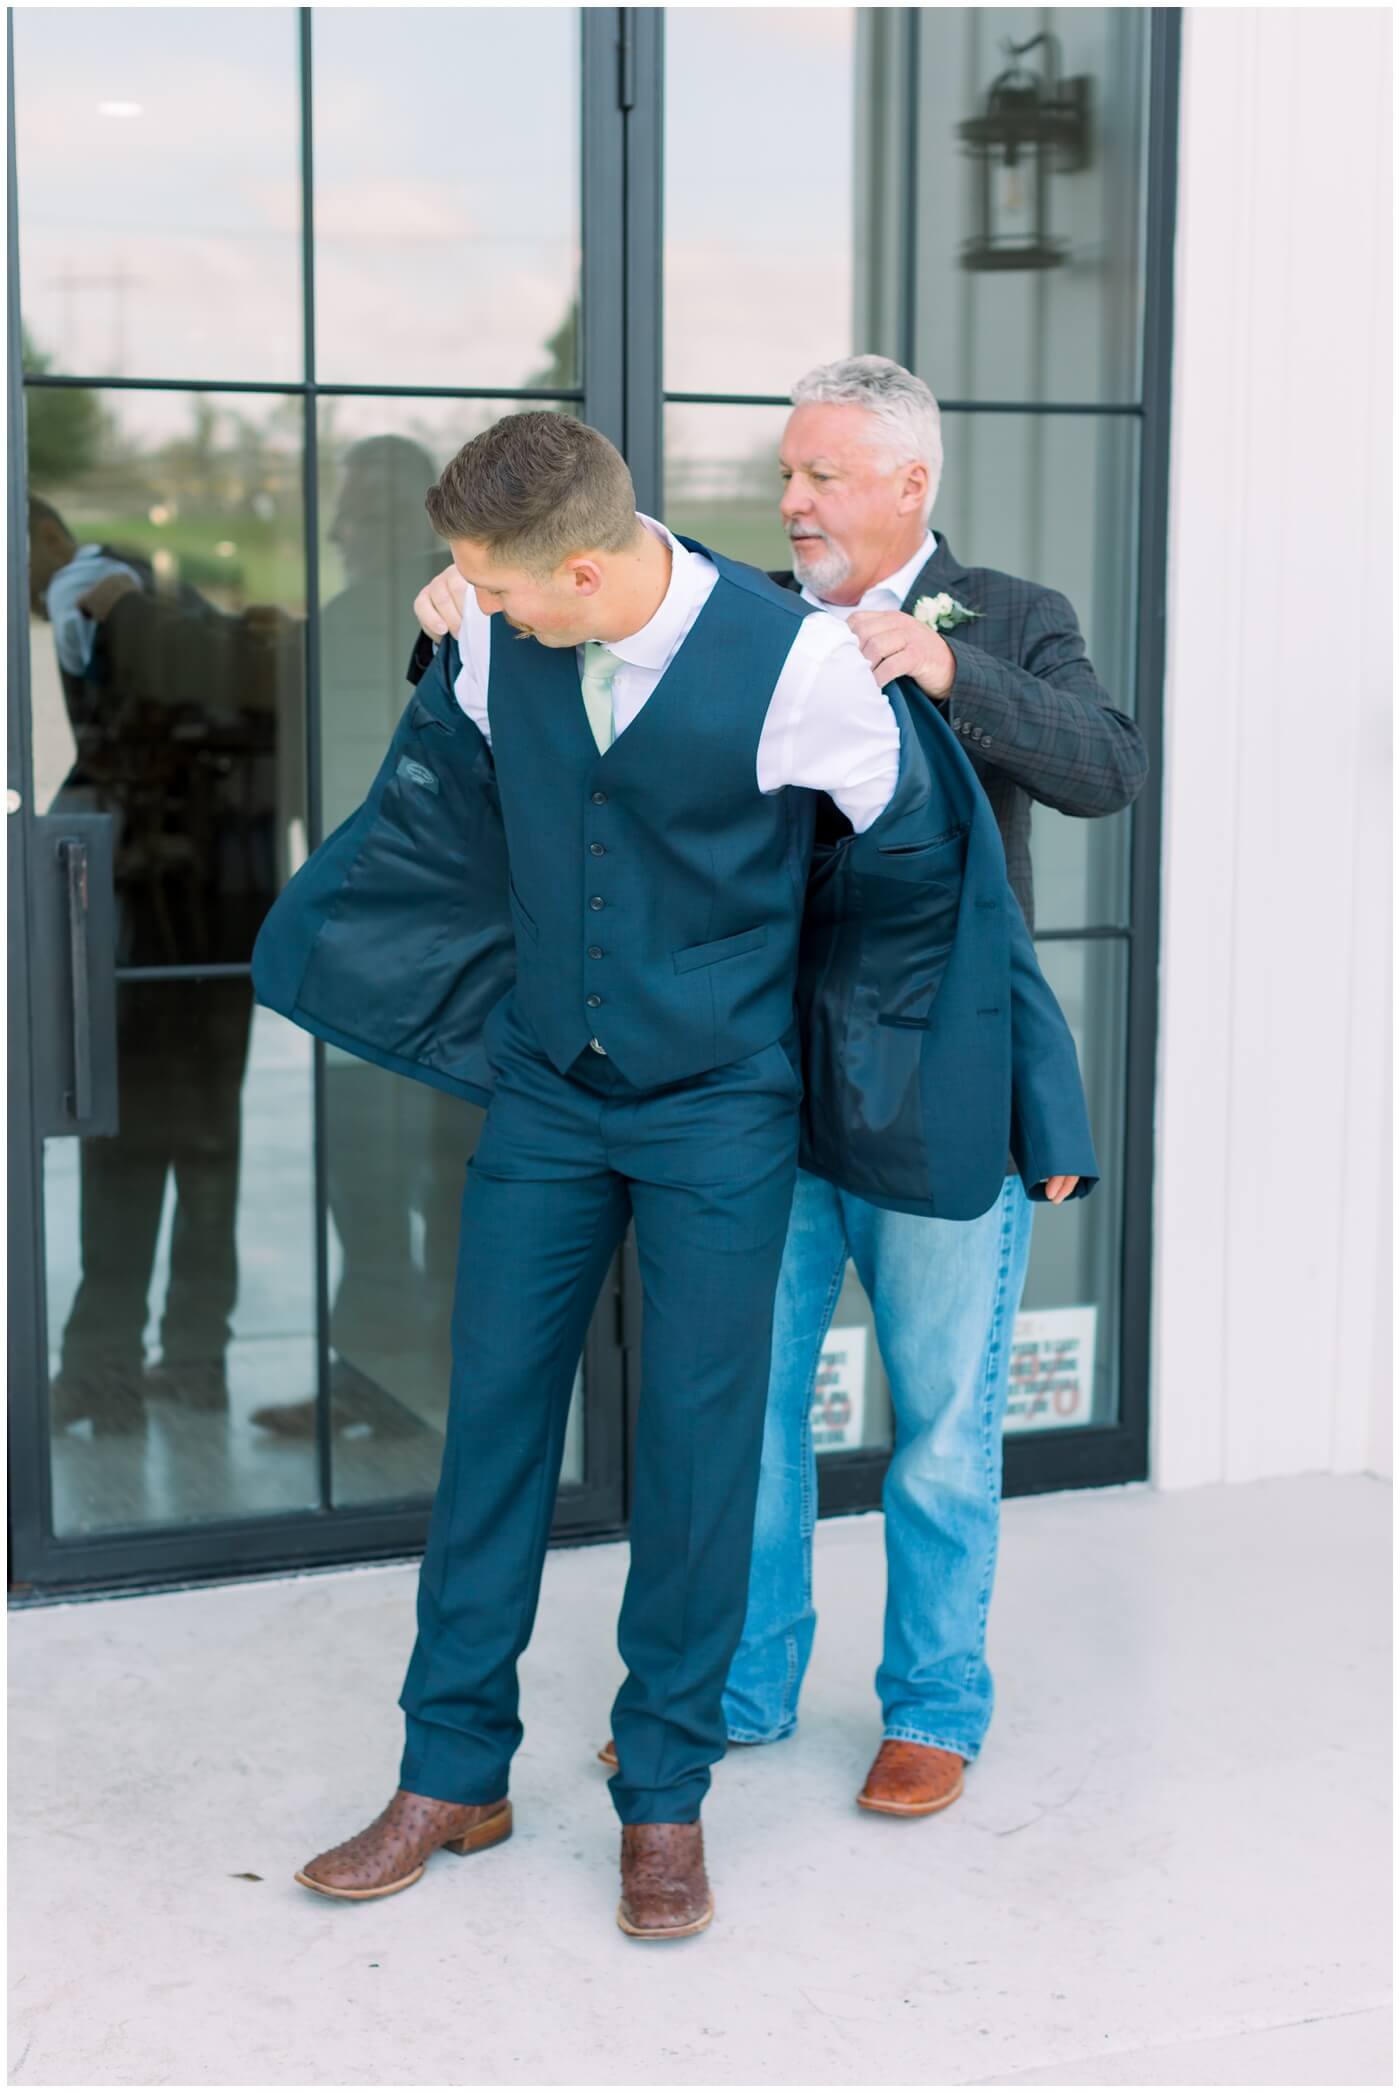 the grooms dad helps his son put his jacket on